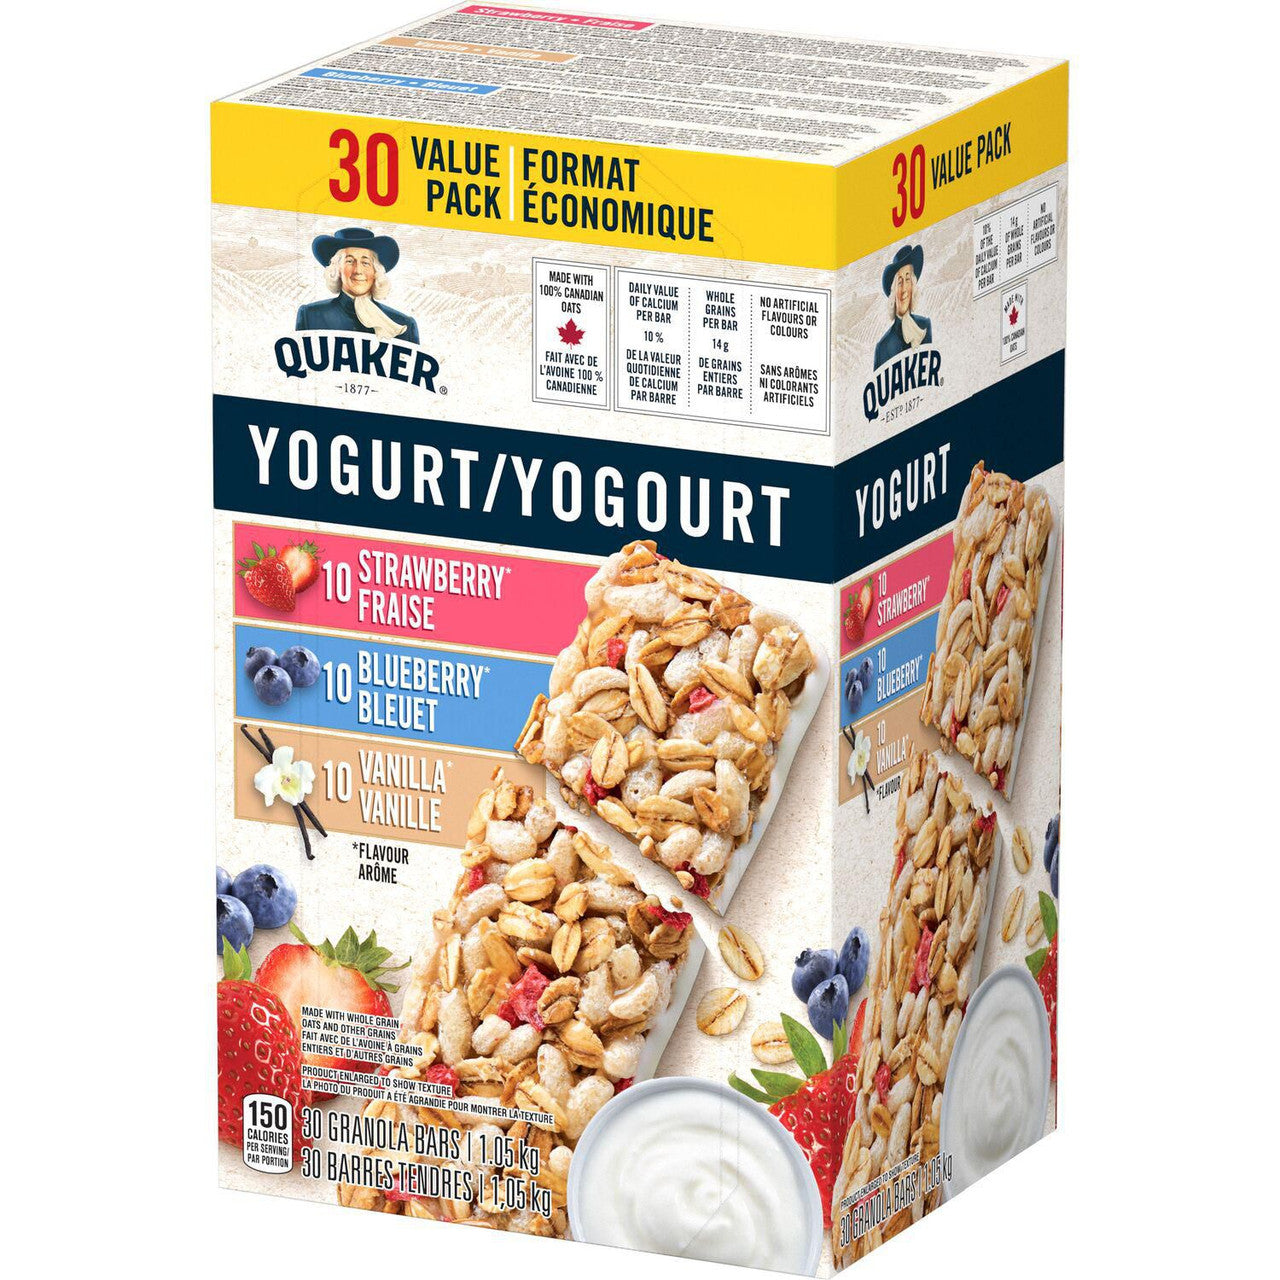 Quaker Yogurt Granola Bars, Strawberry, Vanilla, & Blueberry Variety Pack, 30-count, 1.05kg/2.3 lbs. Box {Imported from Canada}